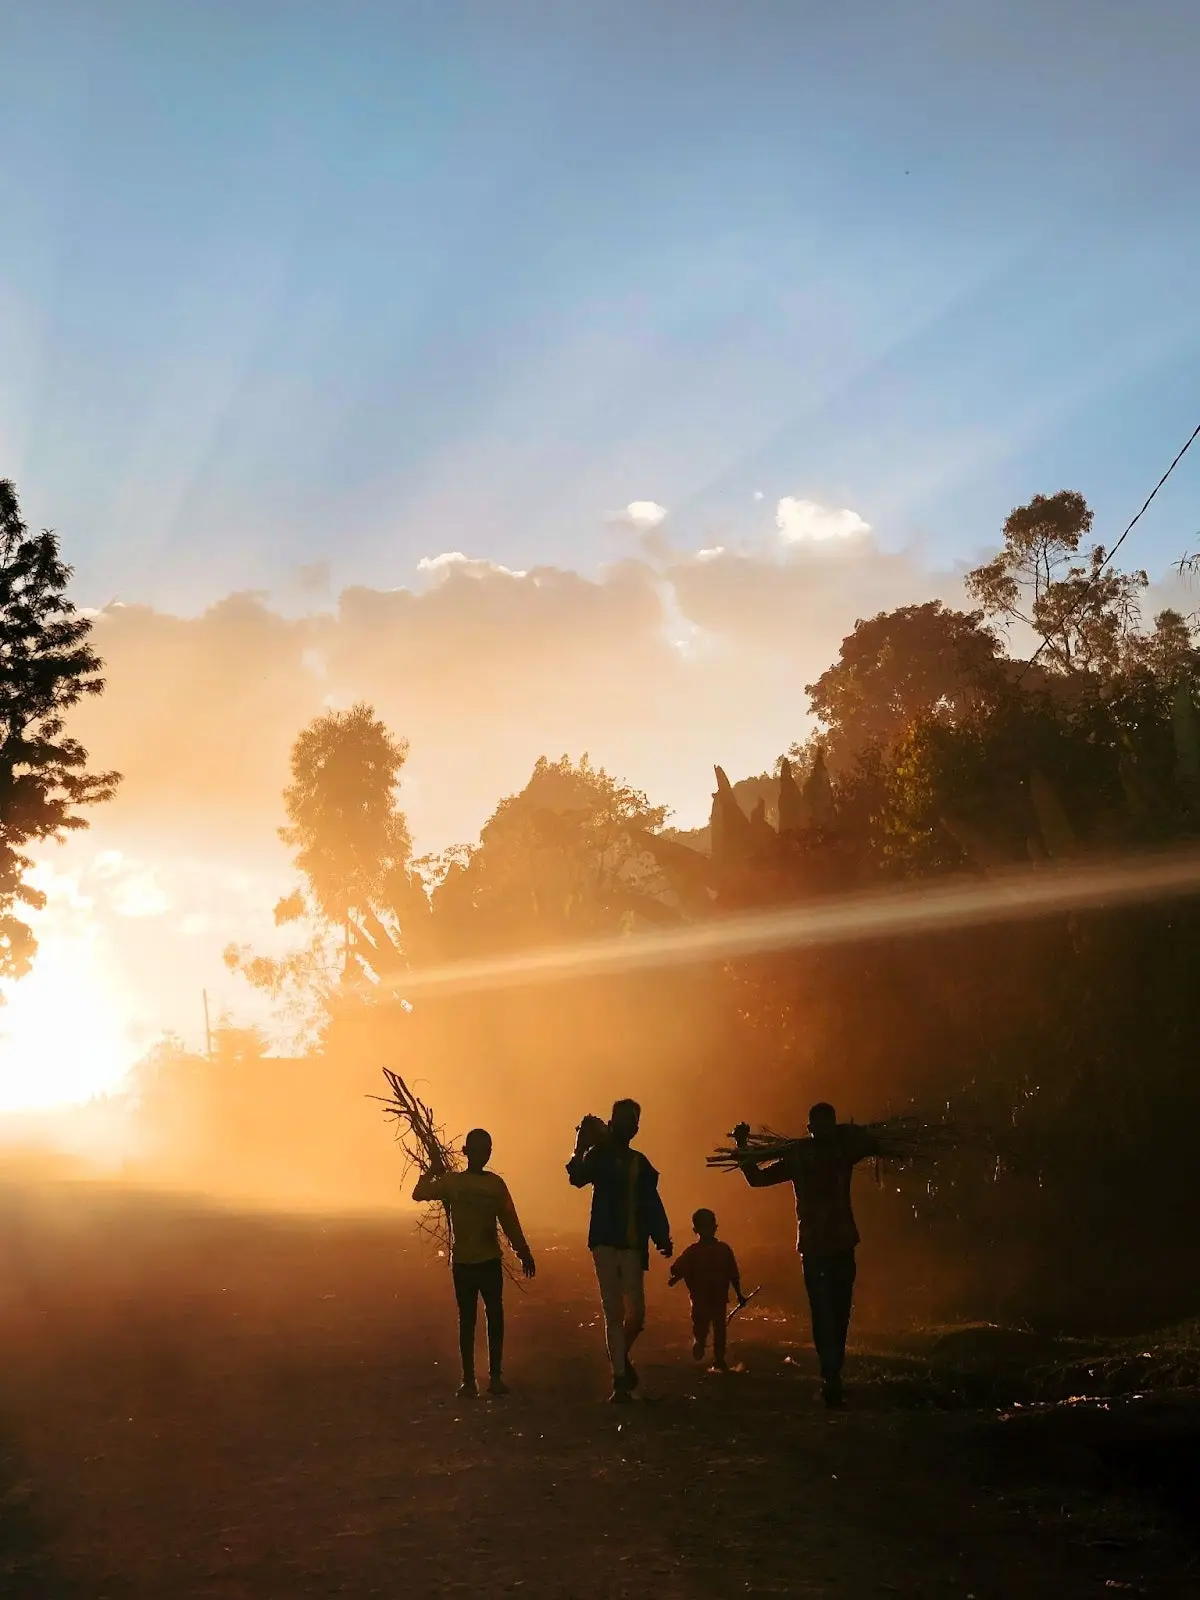 Image of 4 people walking being backlit by the sun. 